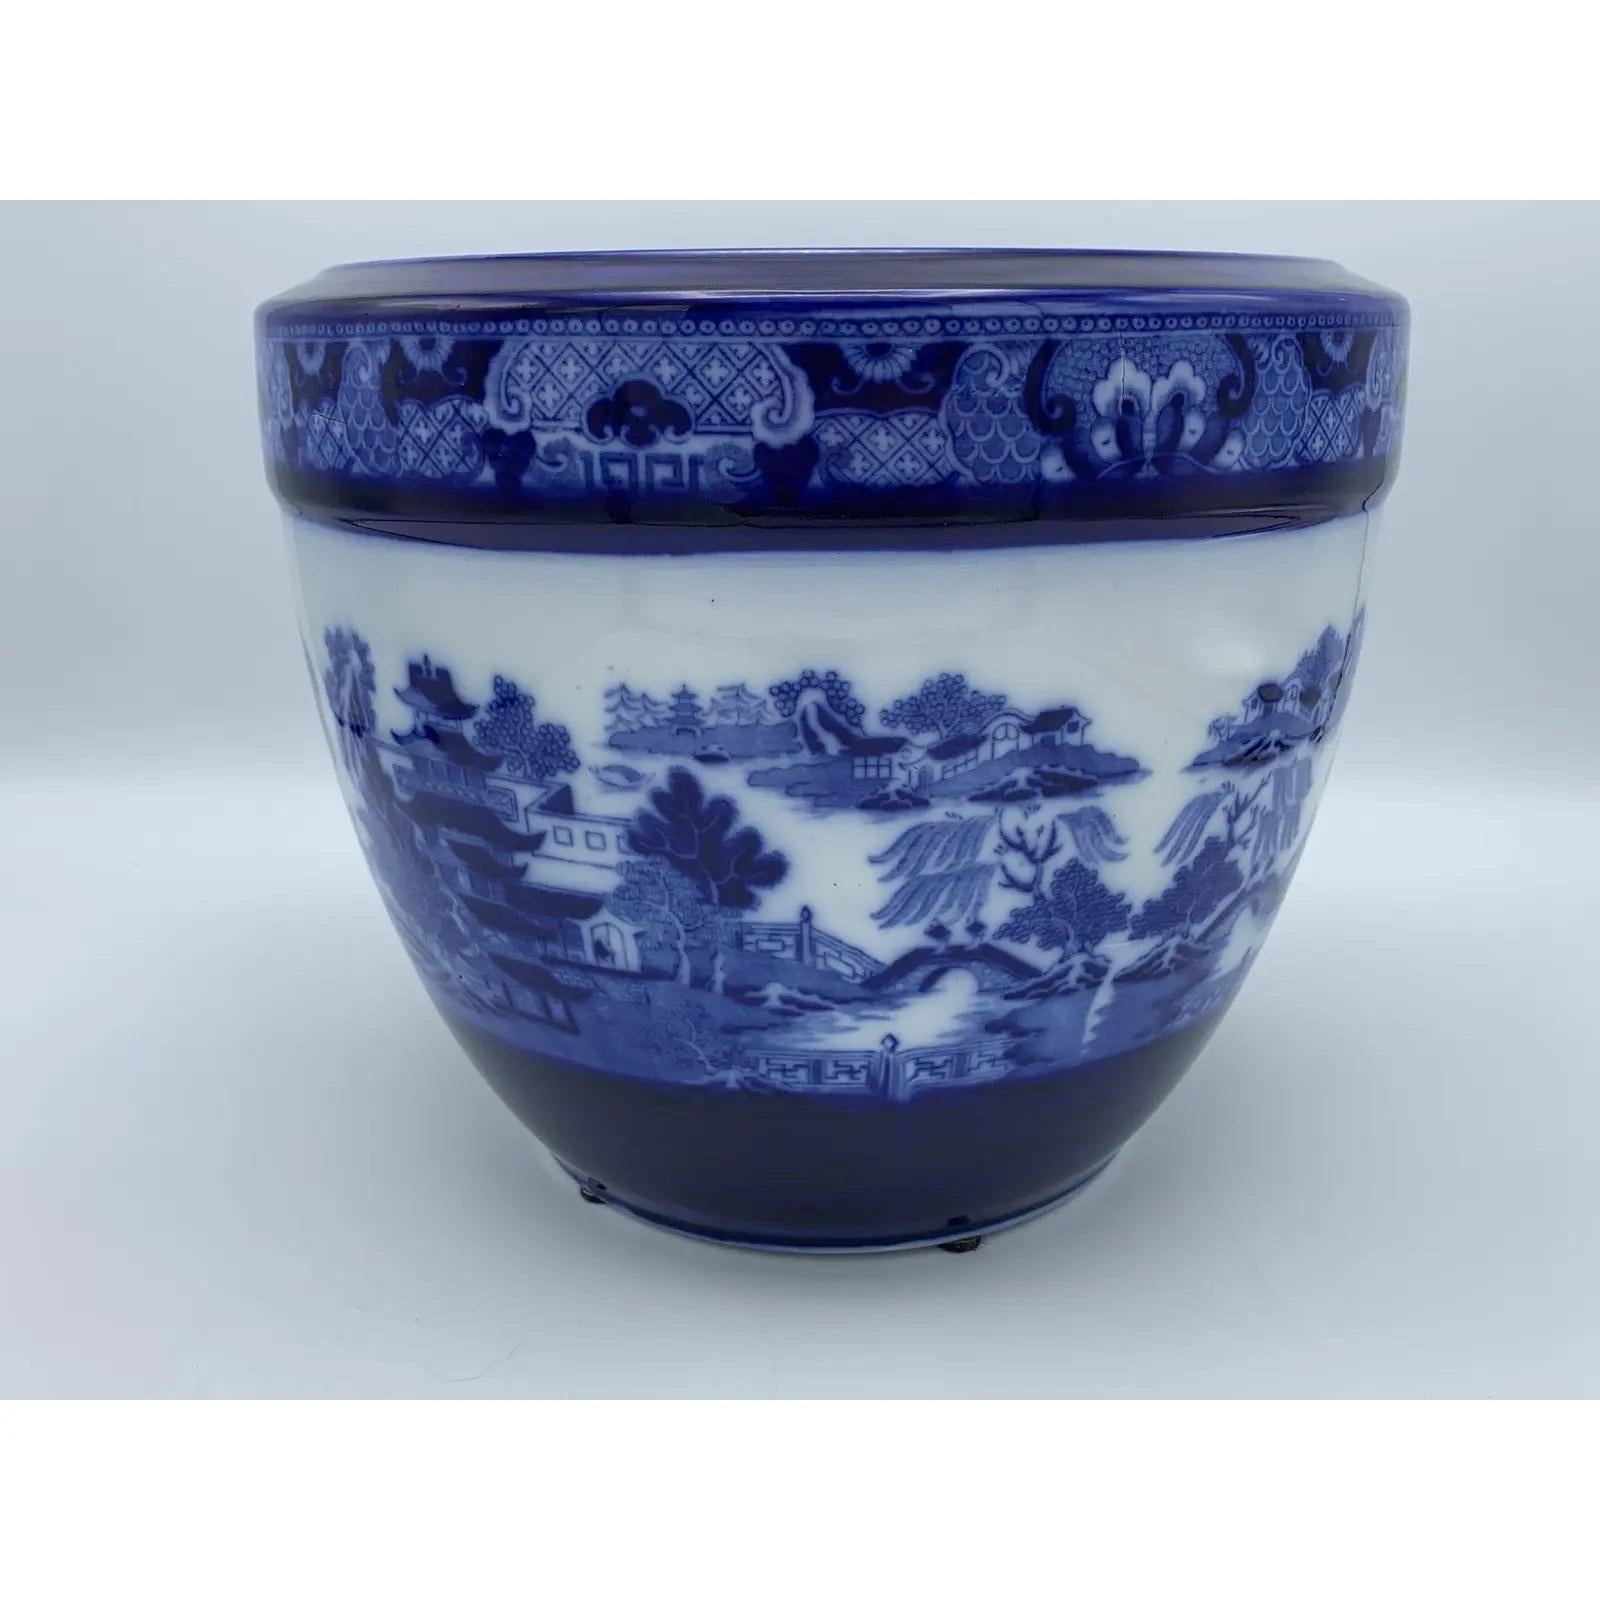 Offered is an exquisite and extremely rare, large early 20th century minton cachepot, circa 1910s-1920s. This stunning European pottery is truly a masterpiece and very difficult to acquire, especially in this large size (8in H x 9.75in W). The deep